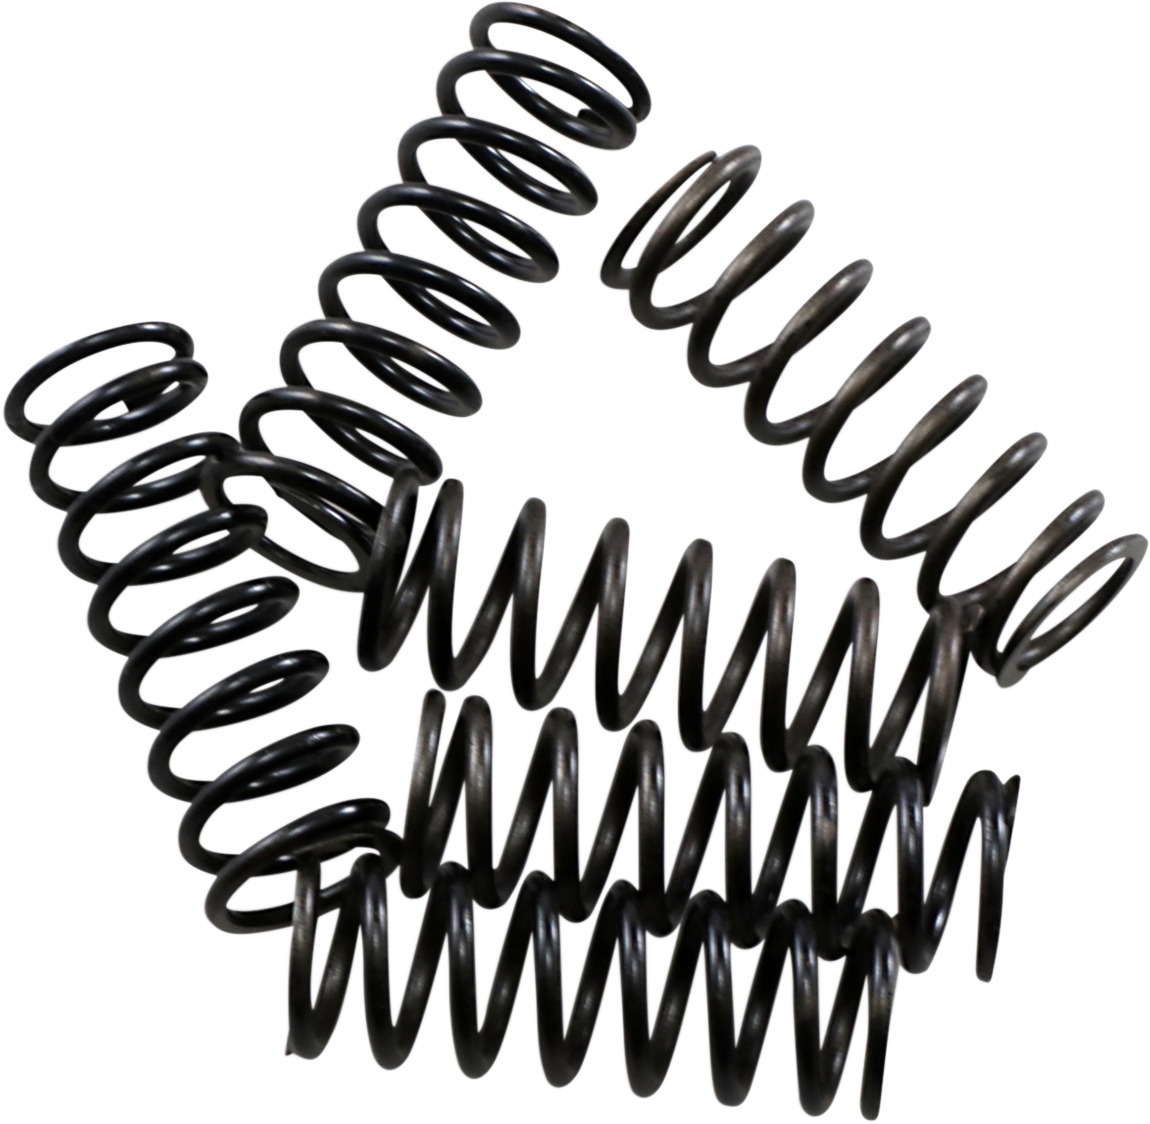 High Temperature Clutch Spring Kit - For 17-20 Honda CRF450 - Click Image to Close